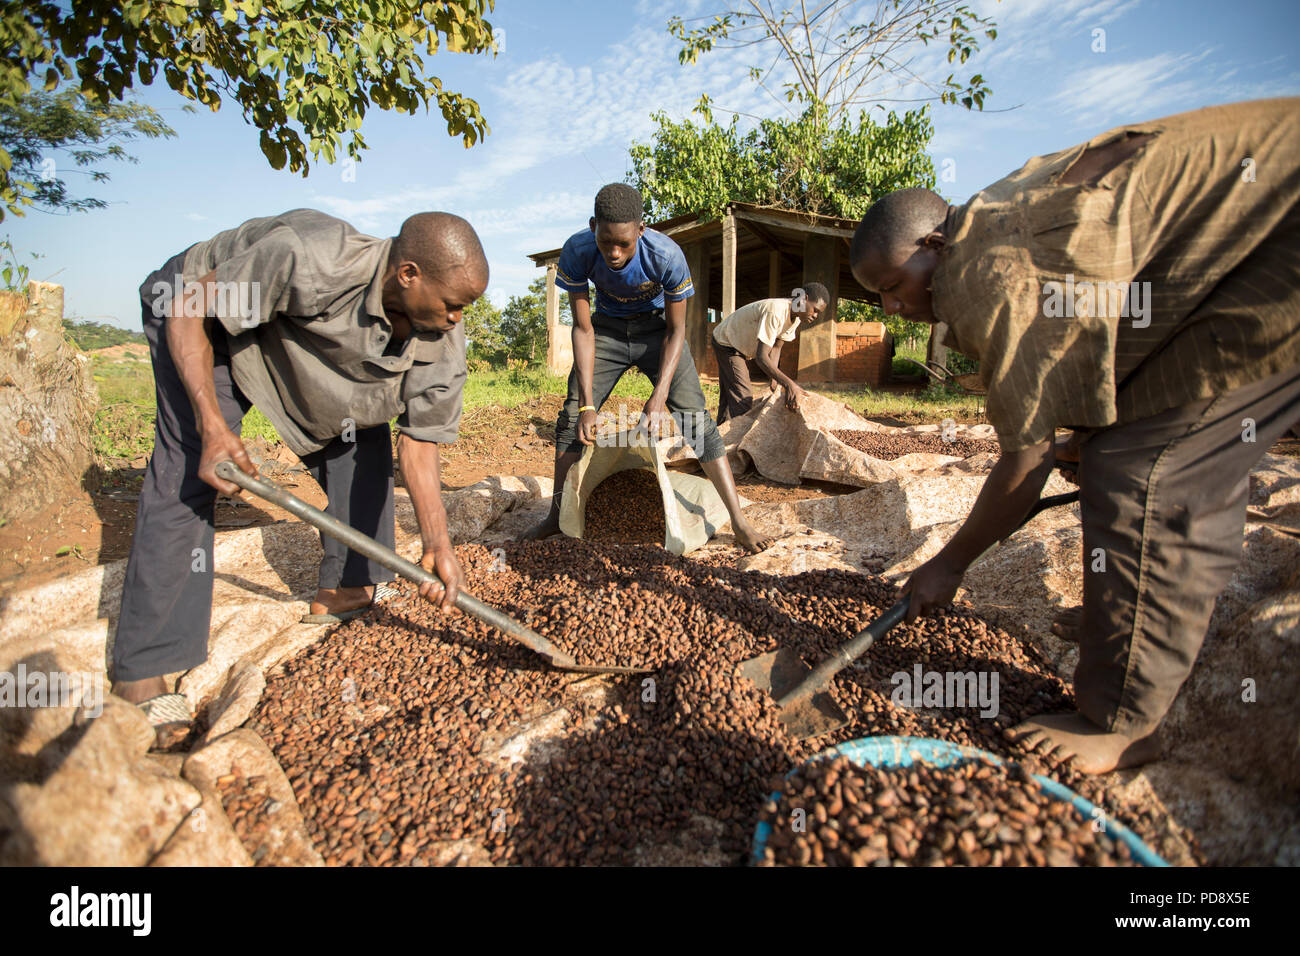 Workers process fermented cocoa beans together at a chocolate production facility in Mukono District, Uganda. Stock Photo